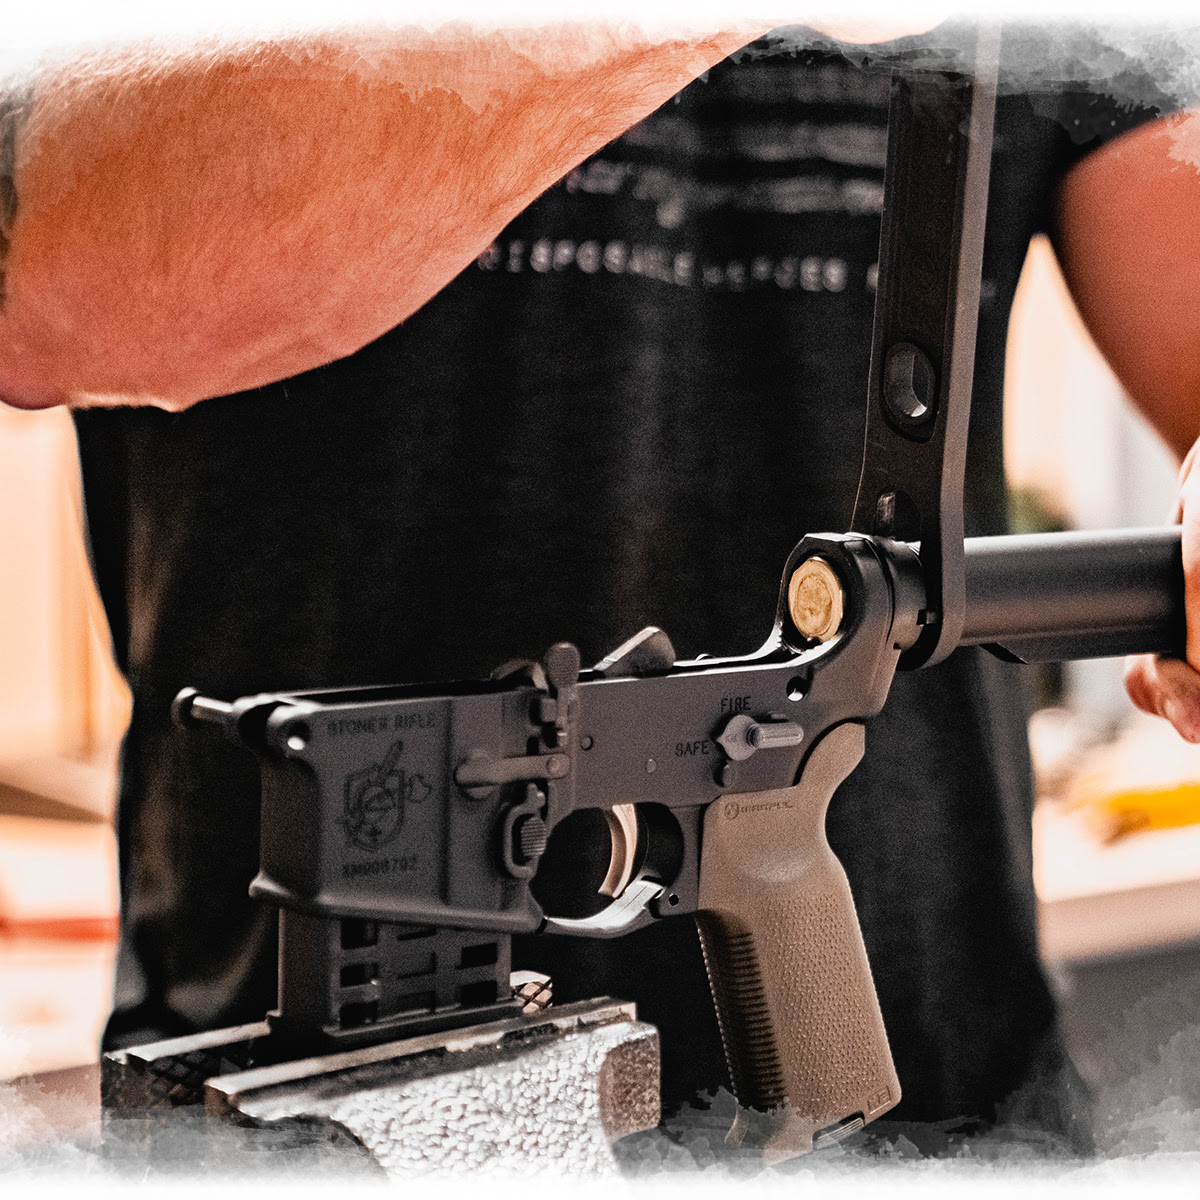 Magpul Tools - Quality you can count on